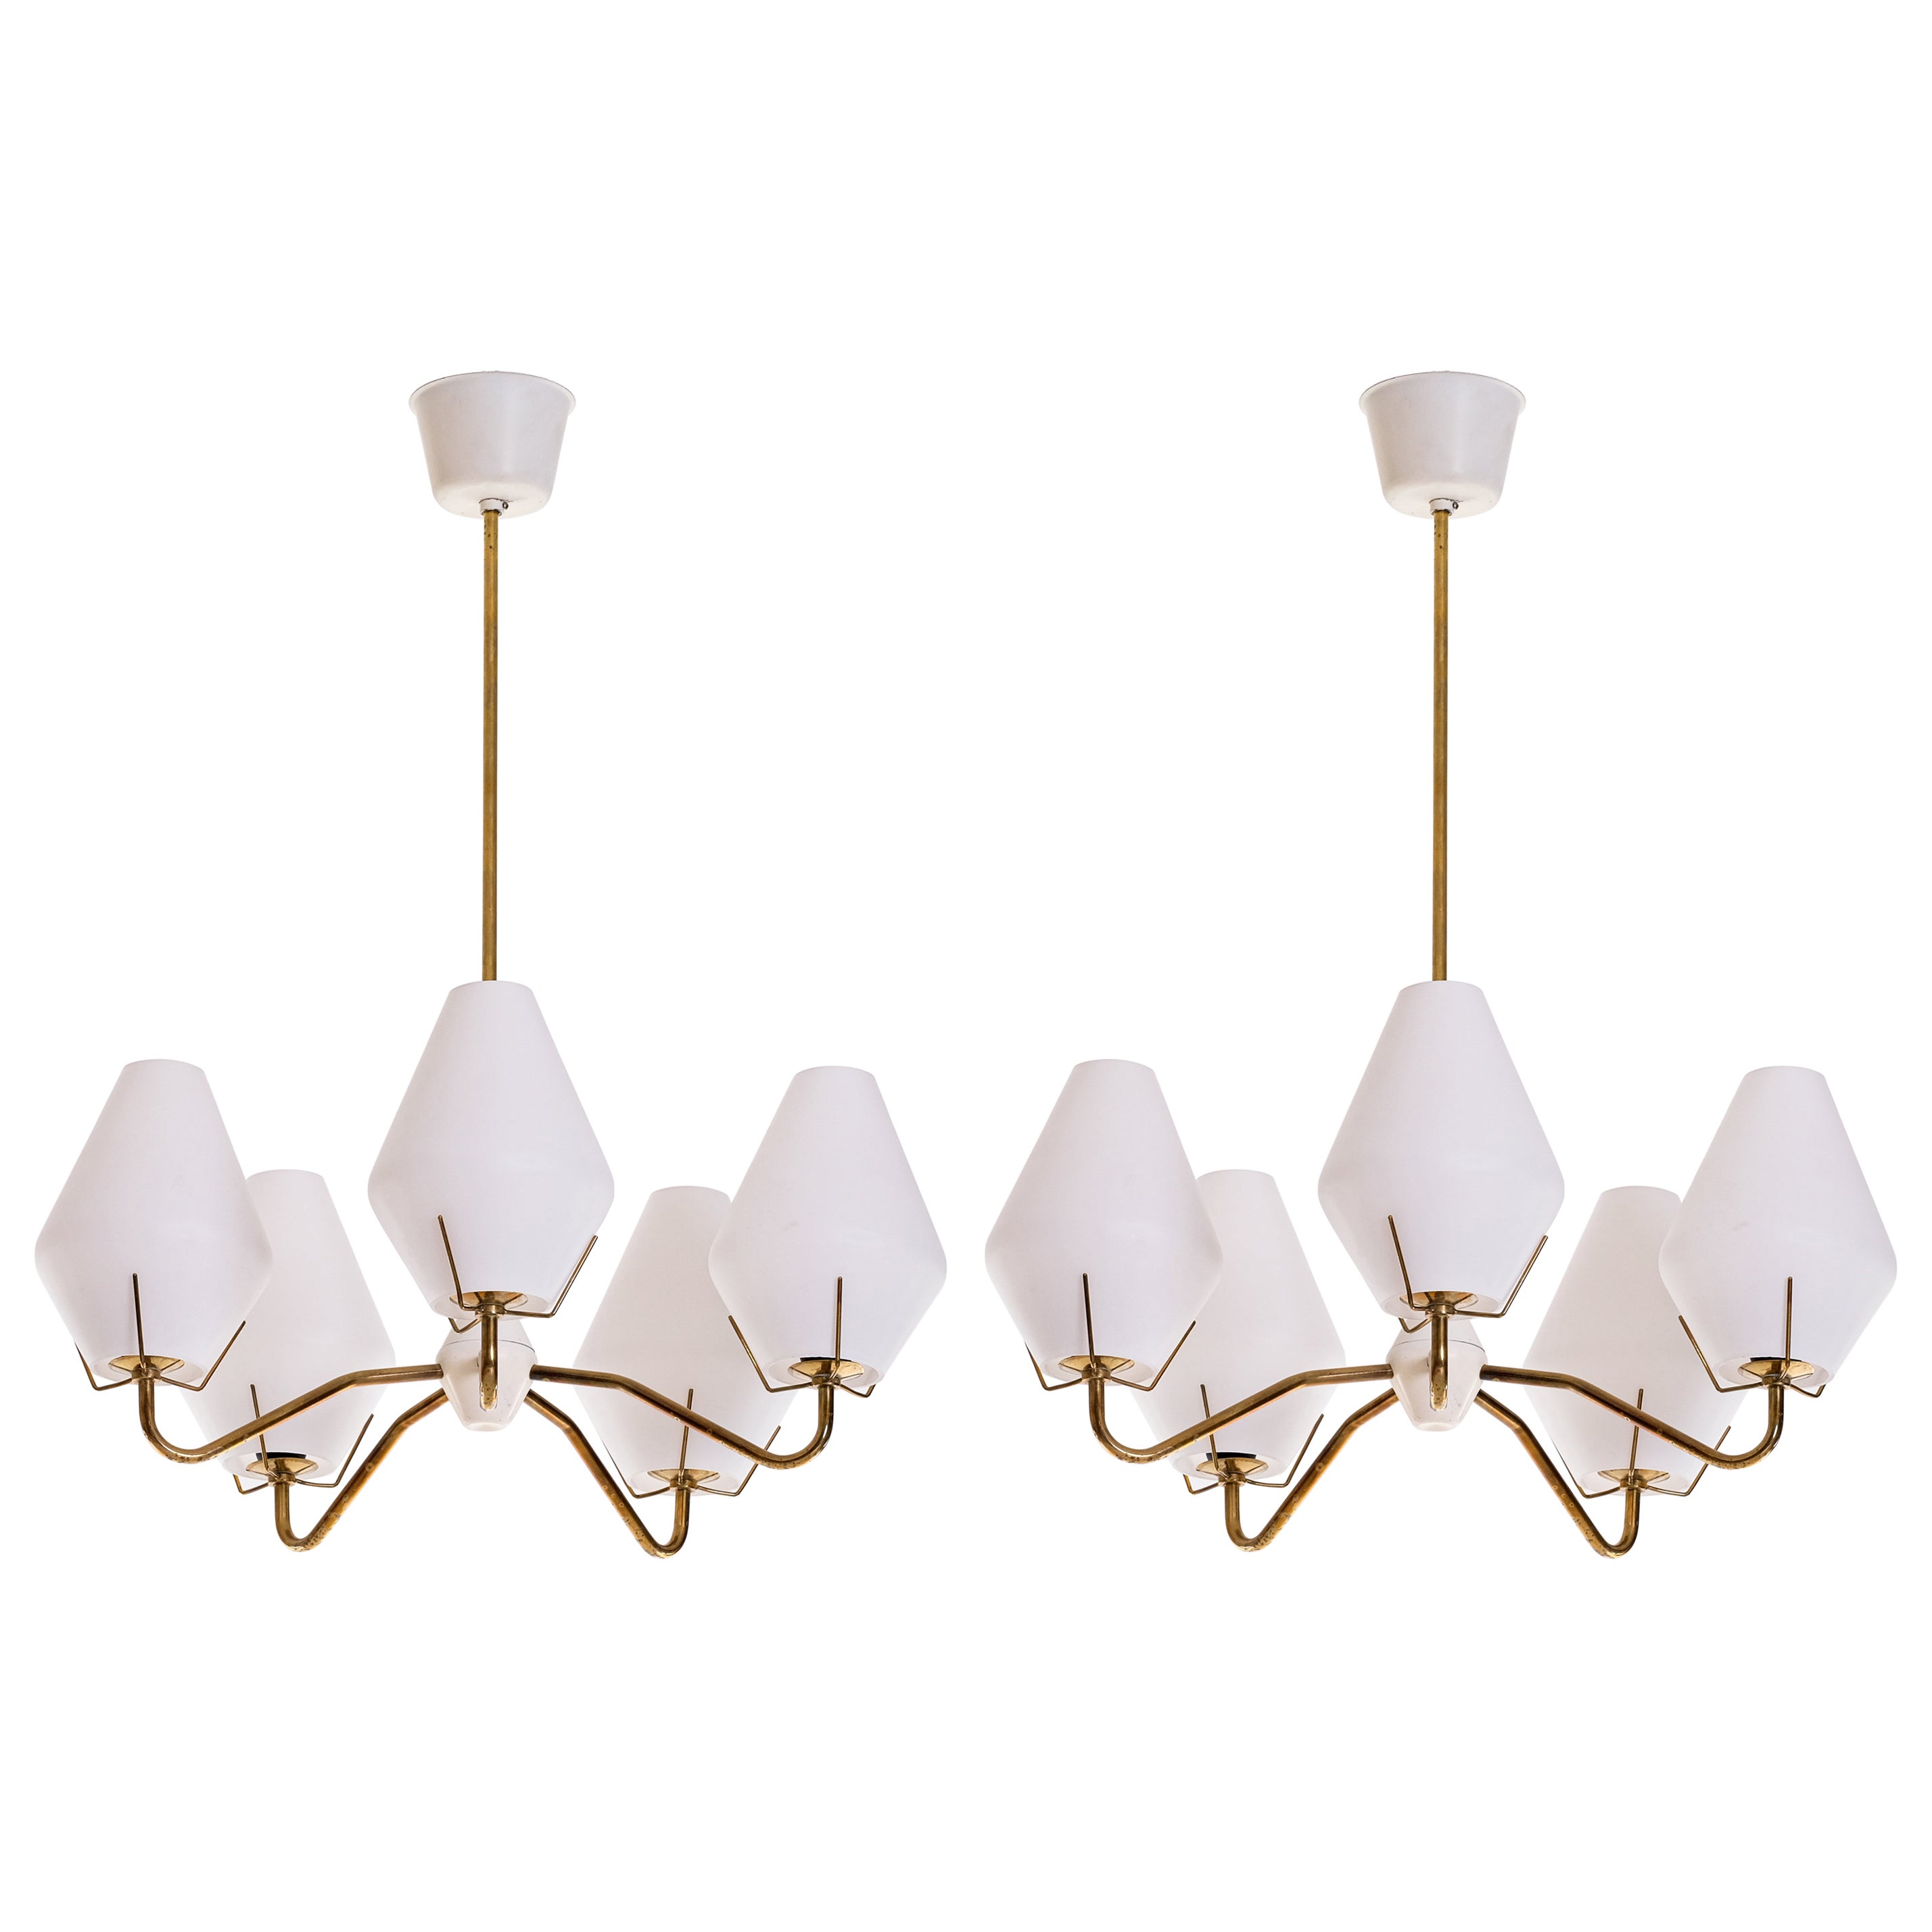 Set of 2 Brass Chandeliers by ASEA, Sweden, 1950s For Sale